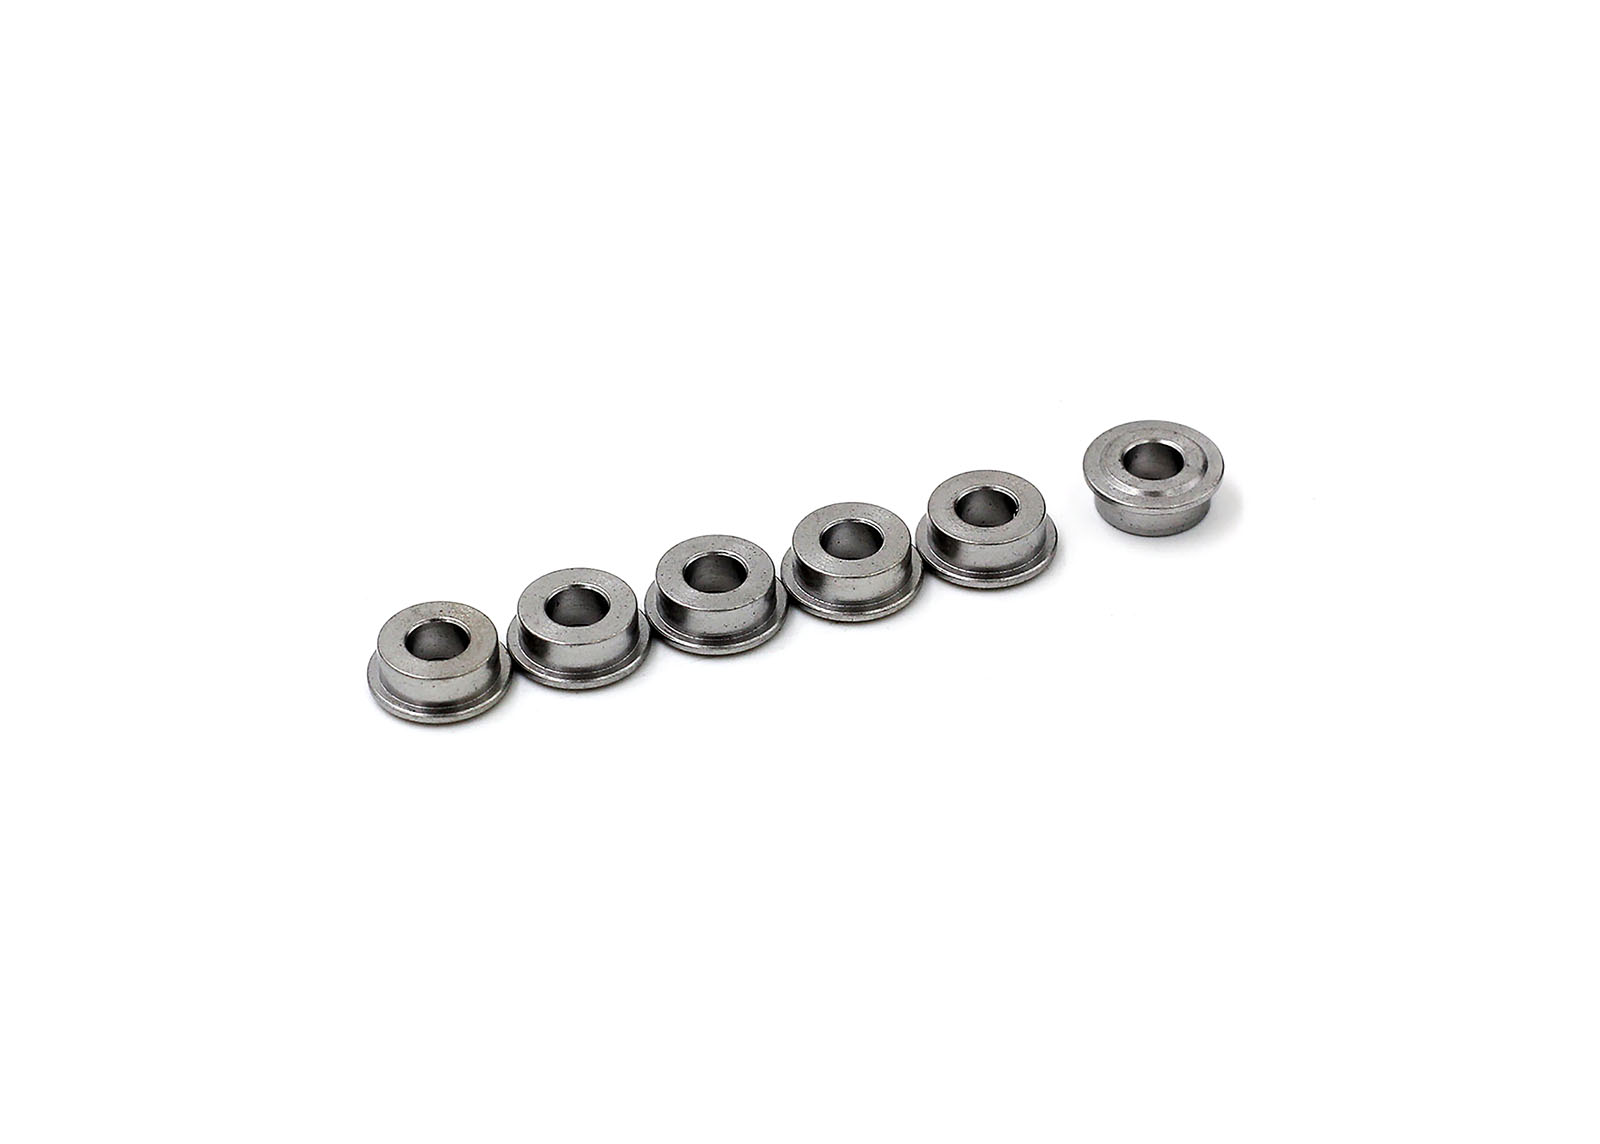 Tempered Stainless Bushing 6mm (6pcs) - Modify Airsoft parts